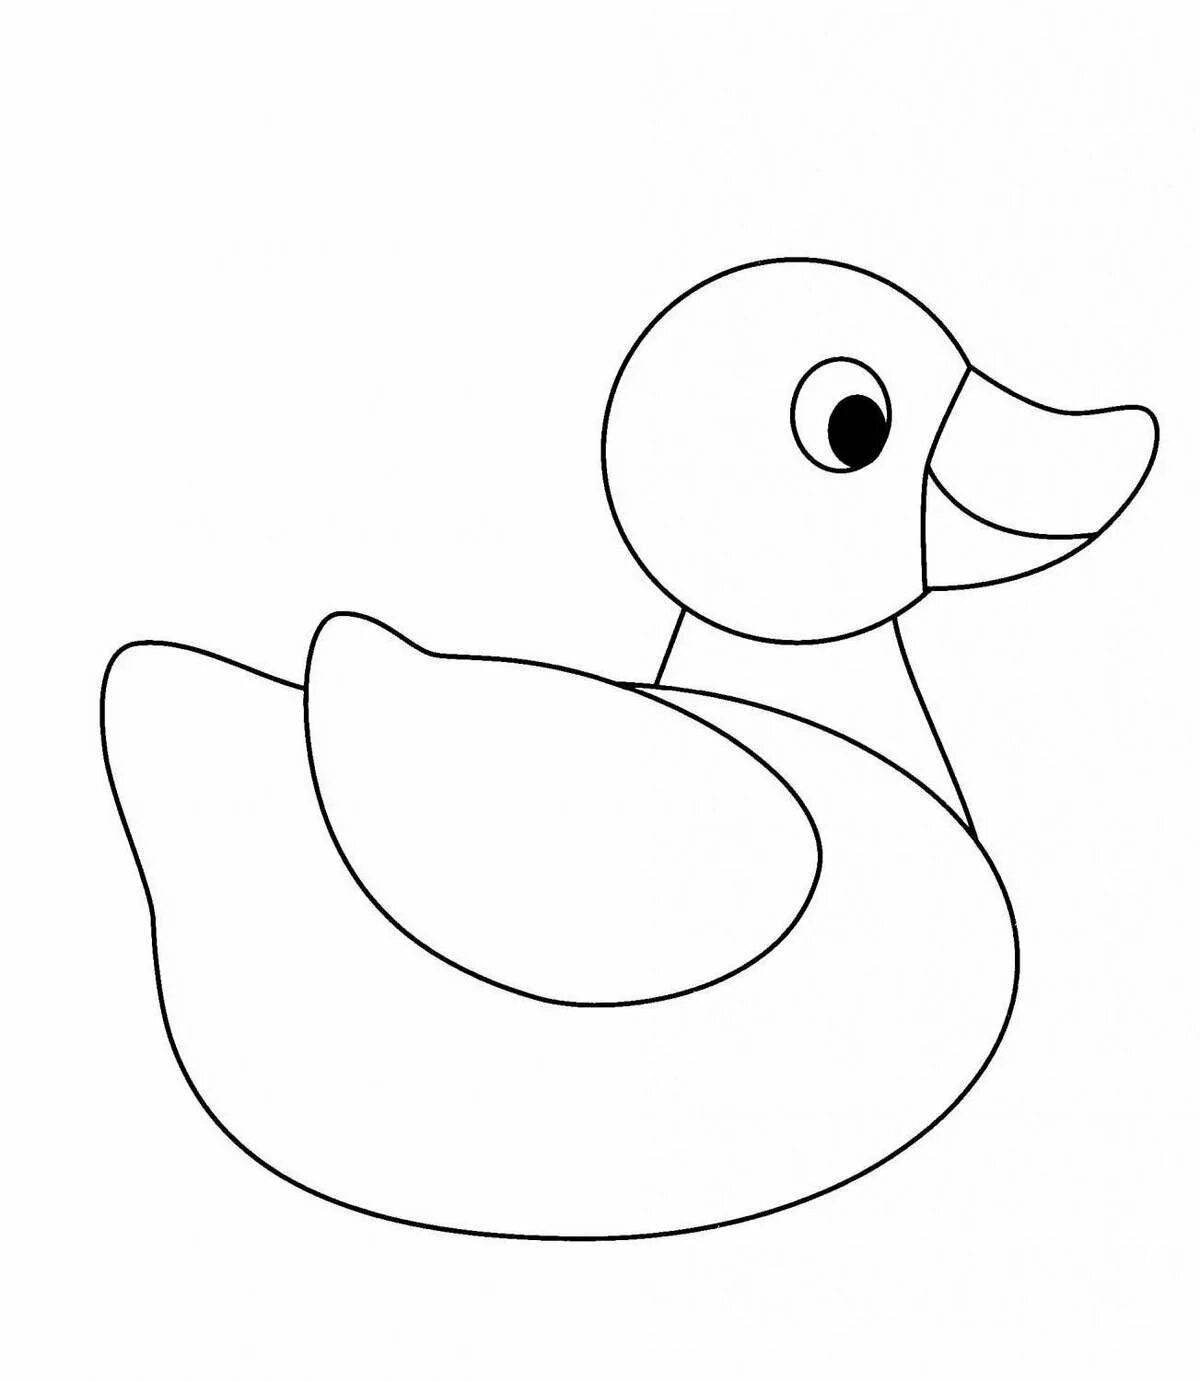 Fine duck toy coloring book